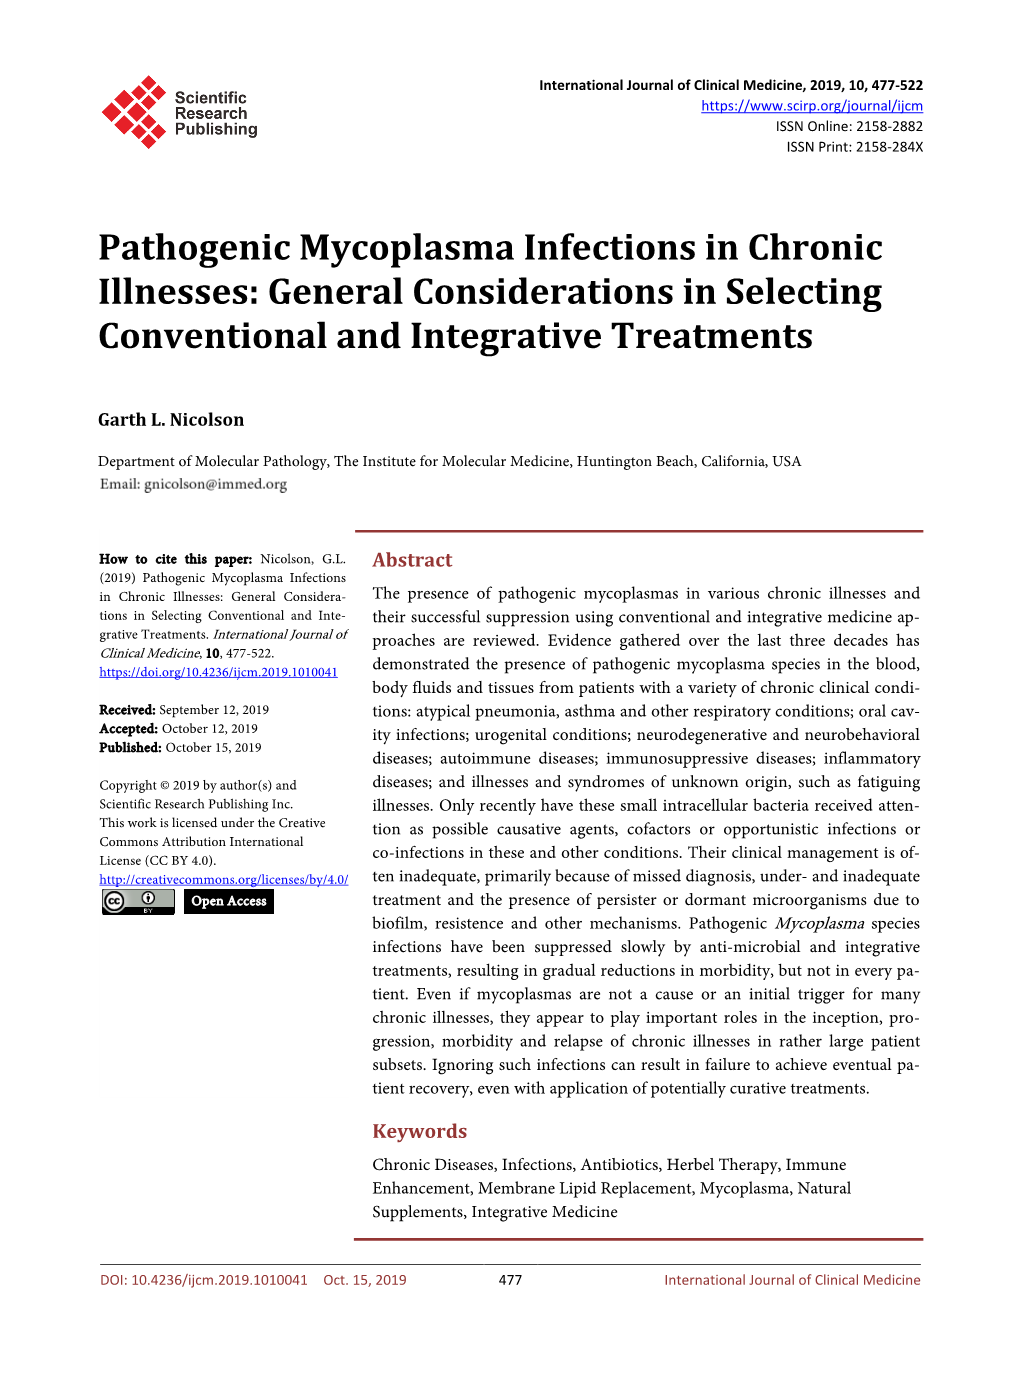 Pathogenic Mycoplasma Infections in Chronic Illnesses: General Considerations in Selecting Conventional and Integrative Treatments